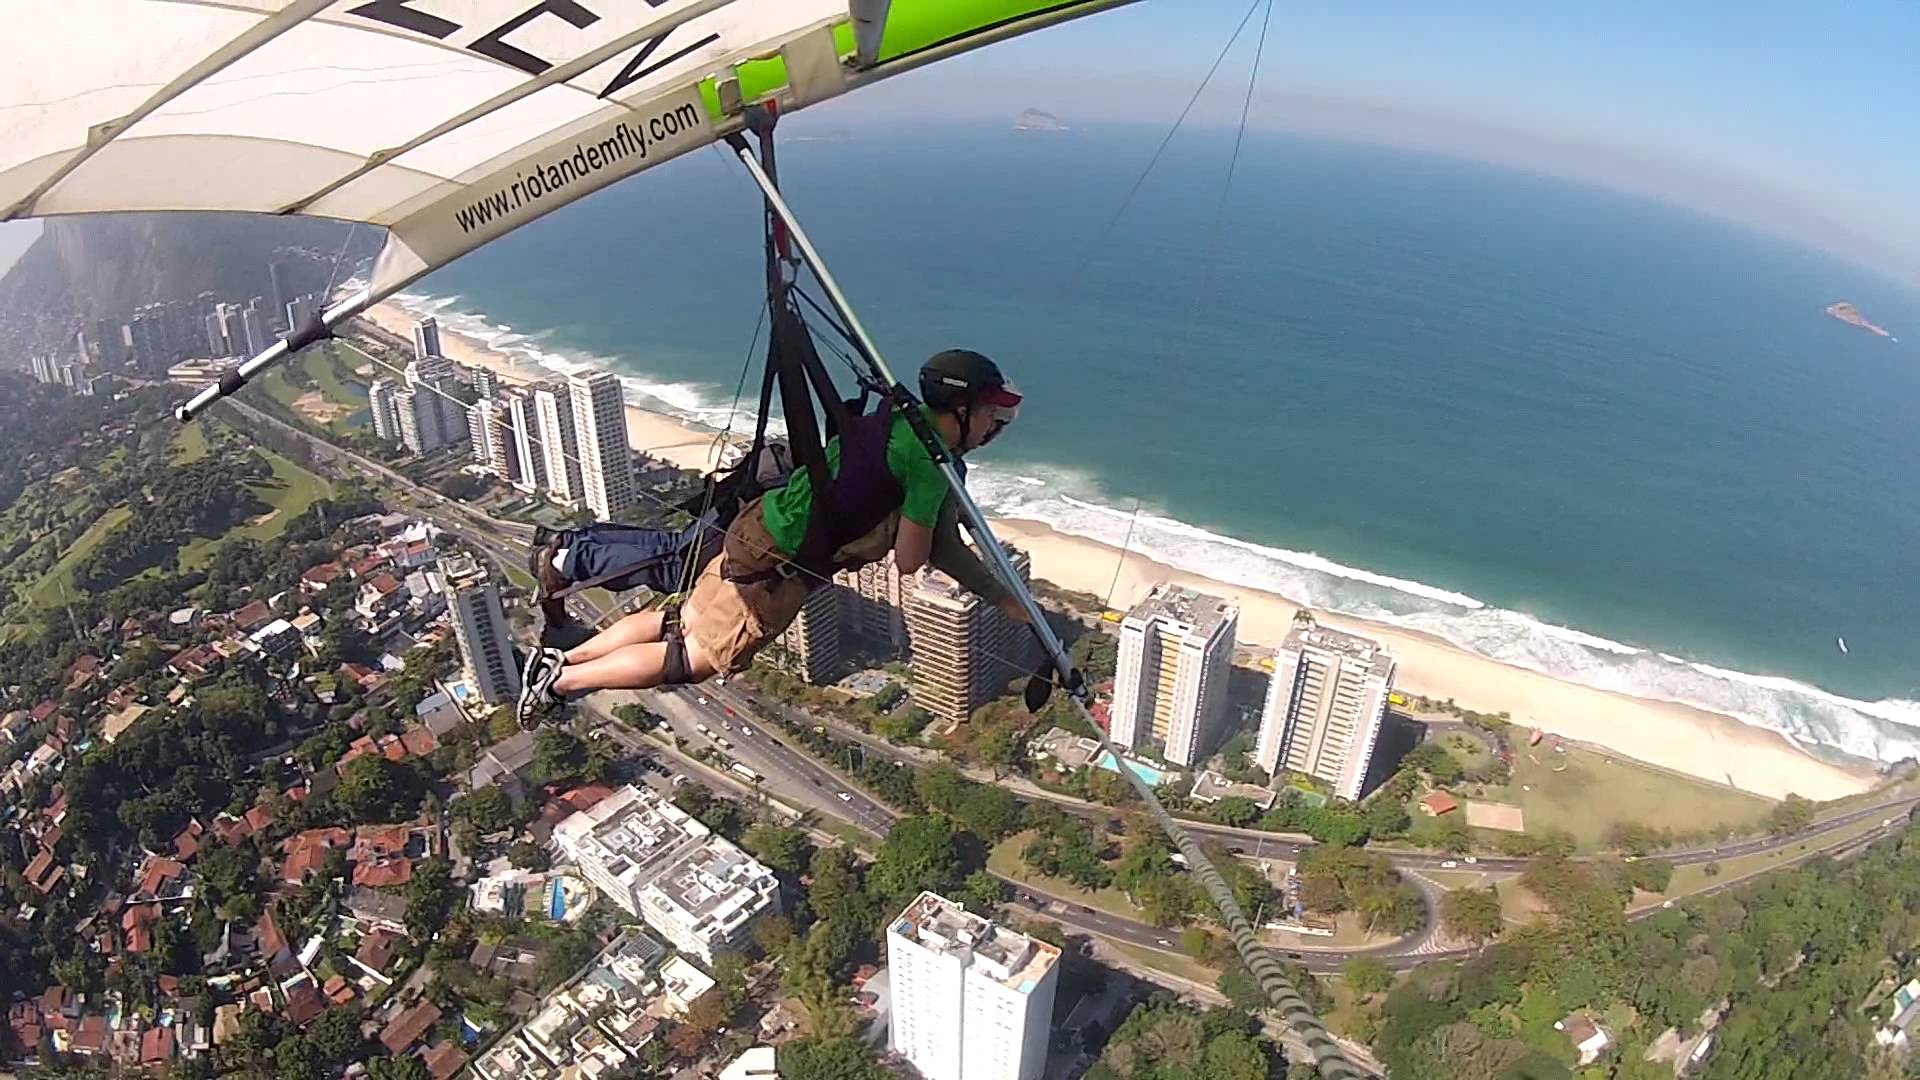 Nokia Releases Crazy Video of Developer Publishing App While Paragliding Over Rio